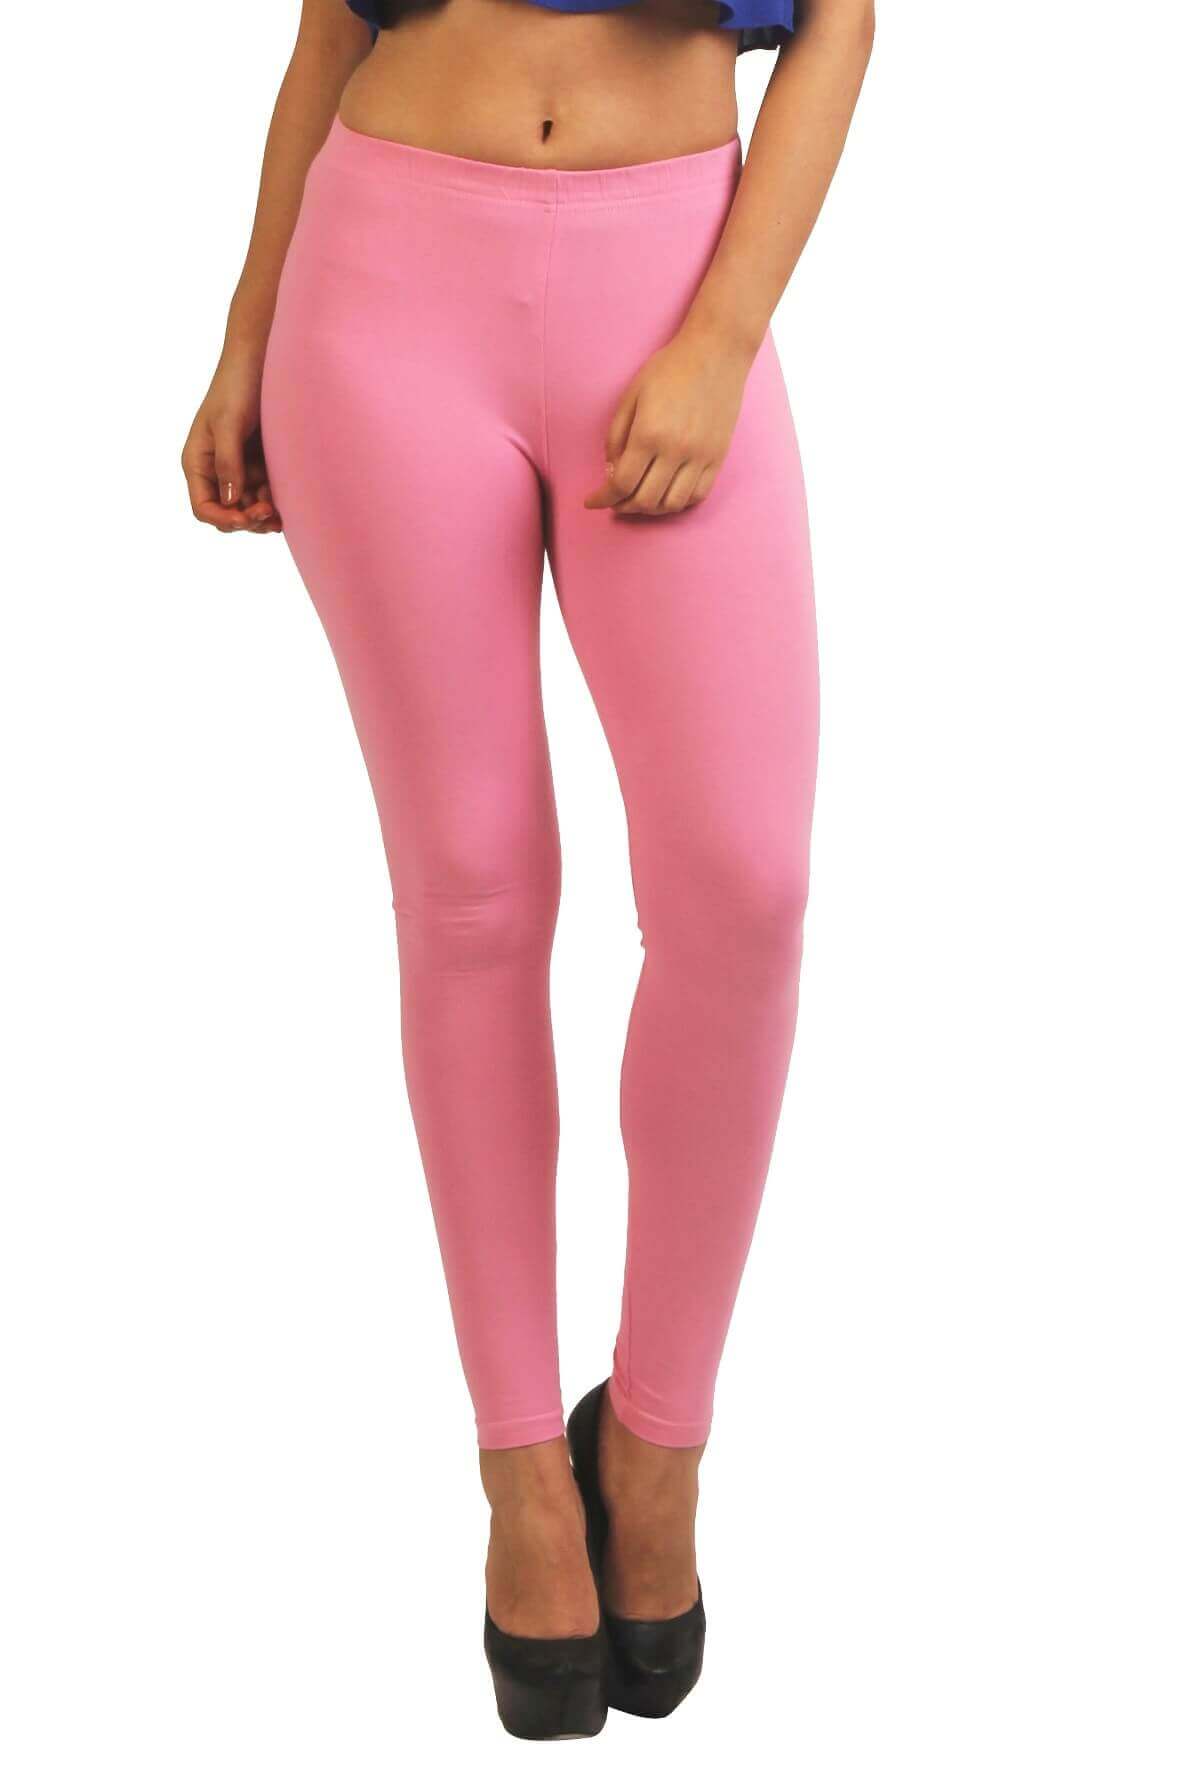 Frenchtrendz - Shop from Frenchtrendz. Go visit our site. http:// frenchtrendz.com/frenchtrendz-cotton-spandex-light-purple-capri #clothing  #clothingbrand #frenchtrendz #frenchtrendzlovers #trending #churidaar # leggings #be_different #jeggings #cycling ...